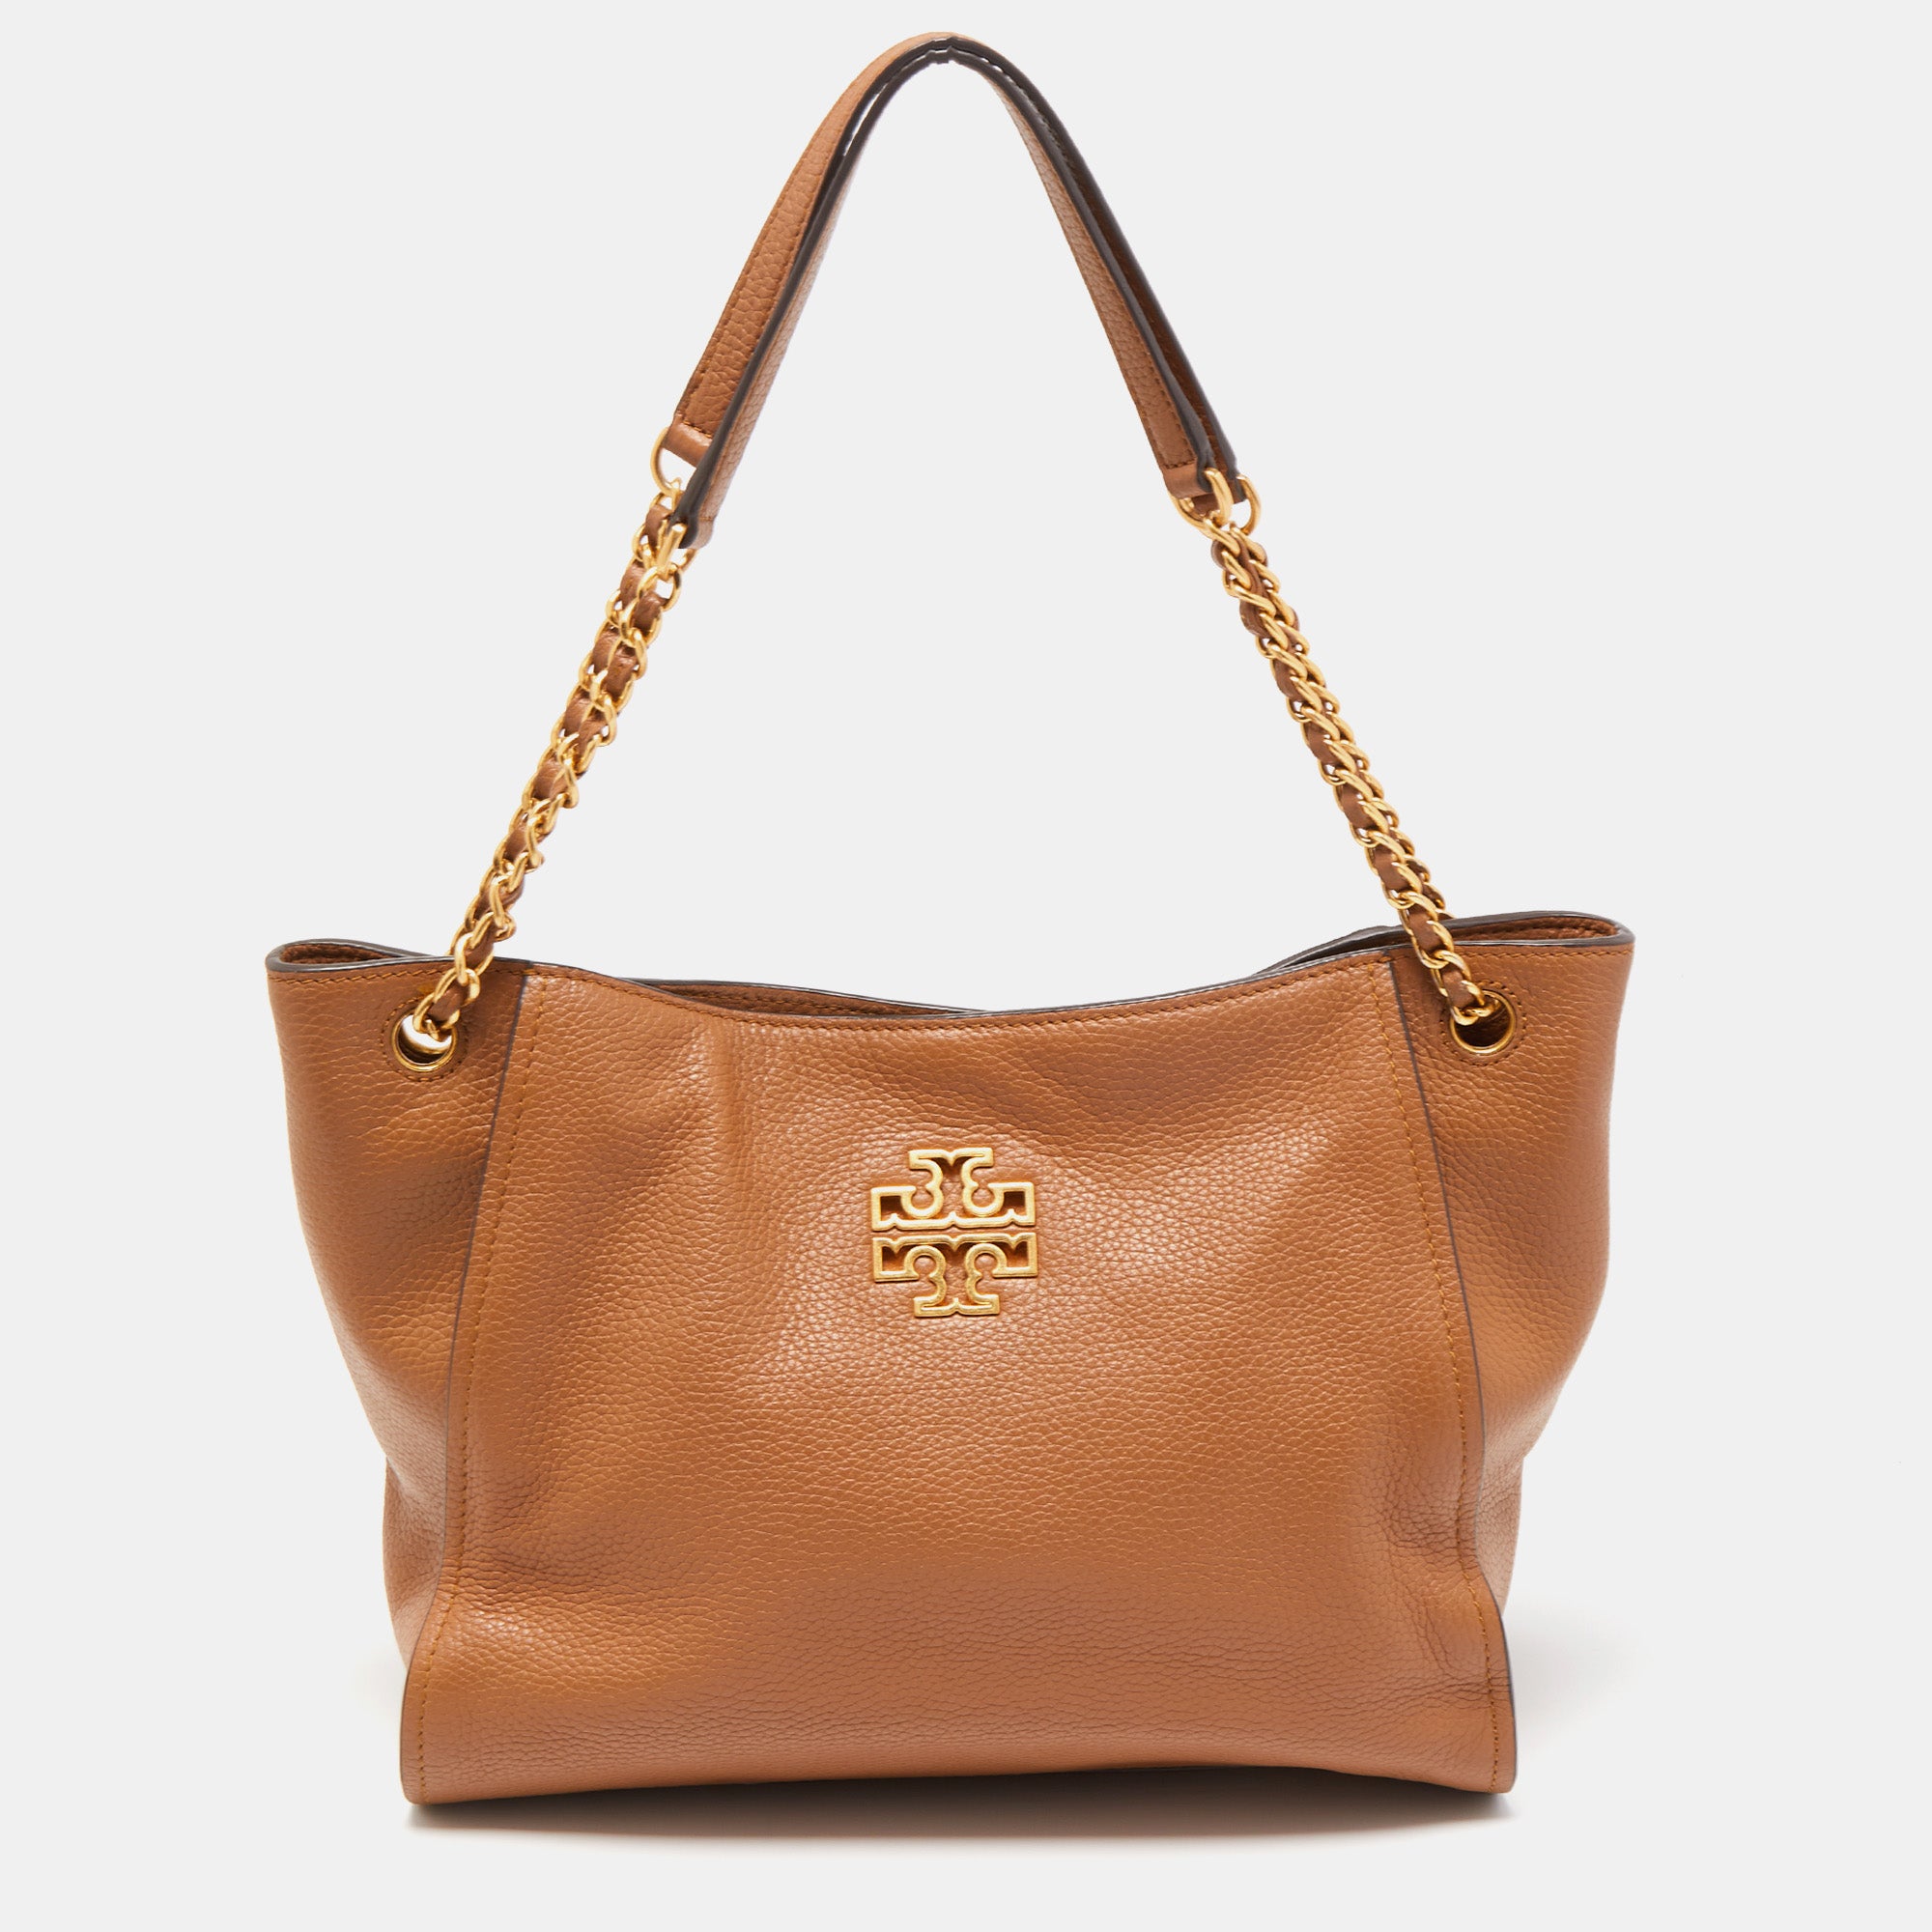 Tory Burch Robinson Leather Shoulder Bag in Brown | Lyst